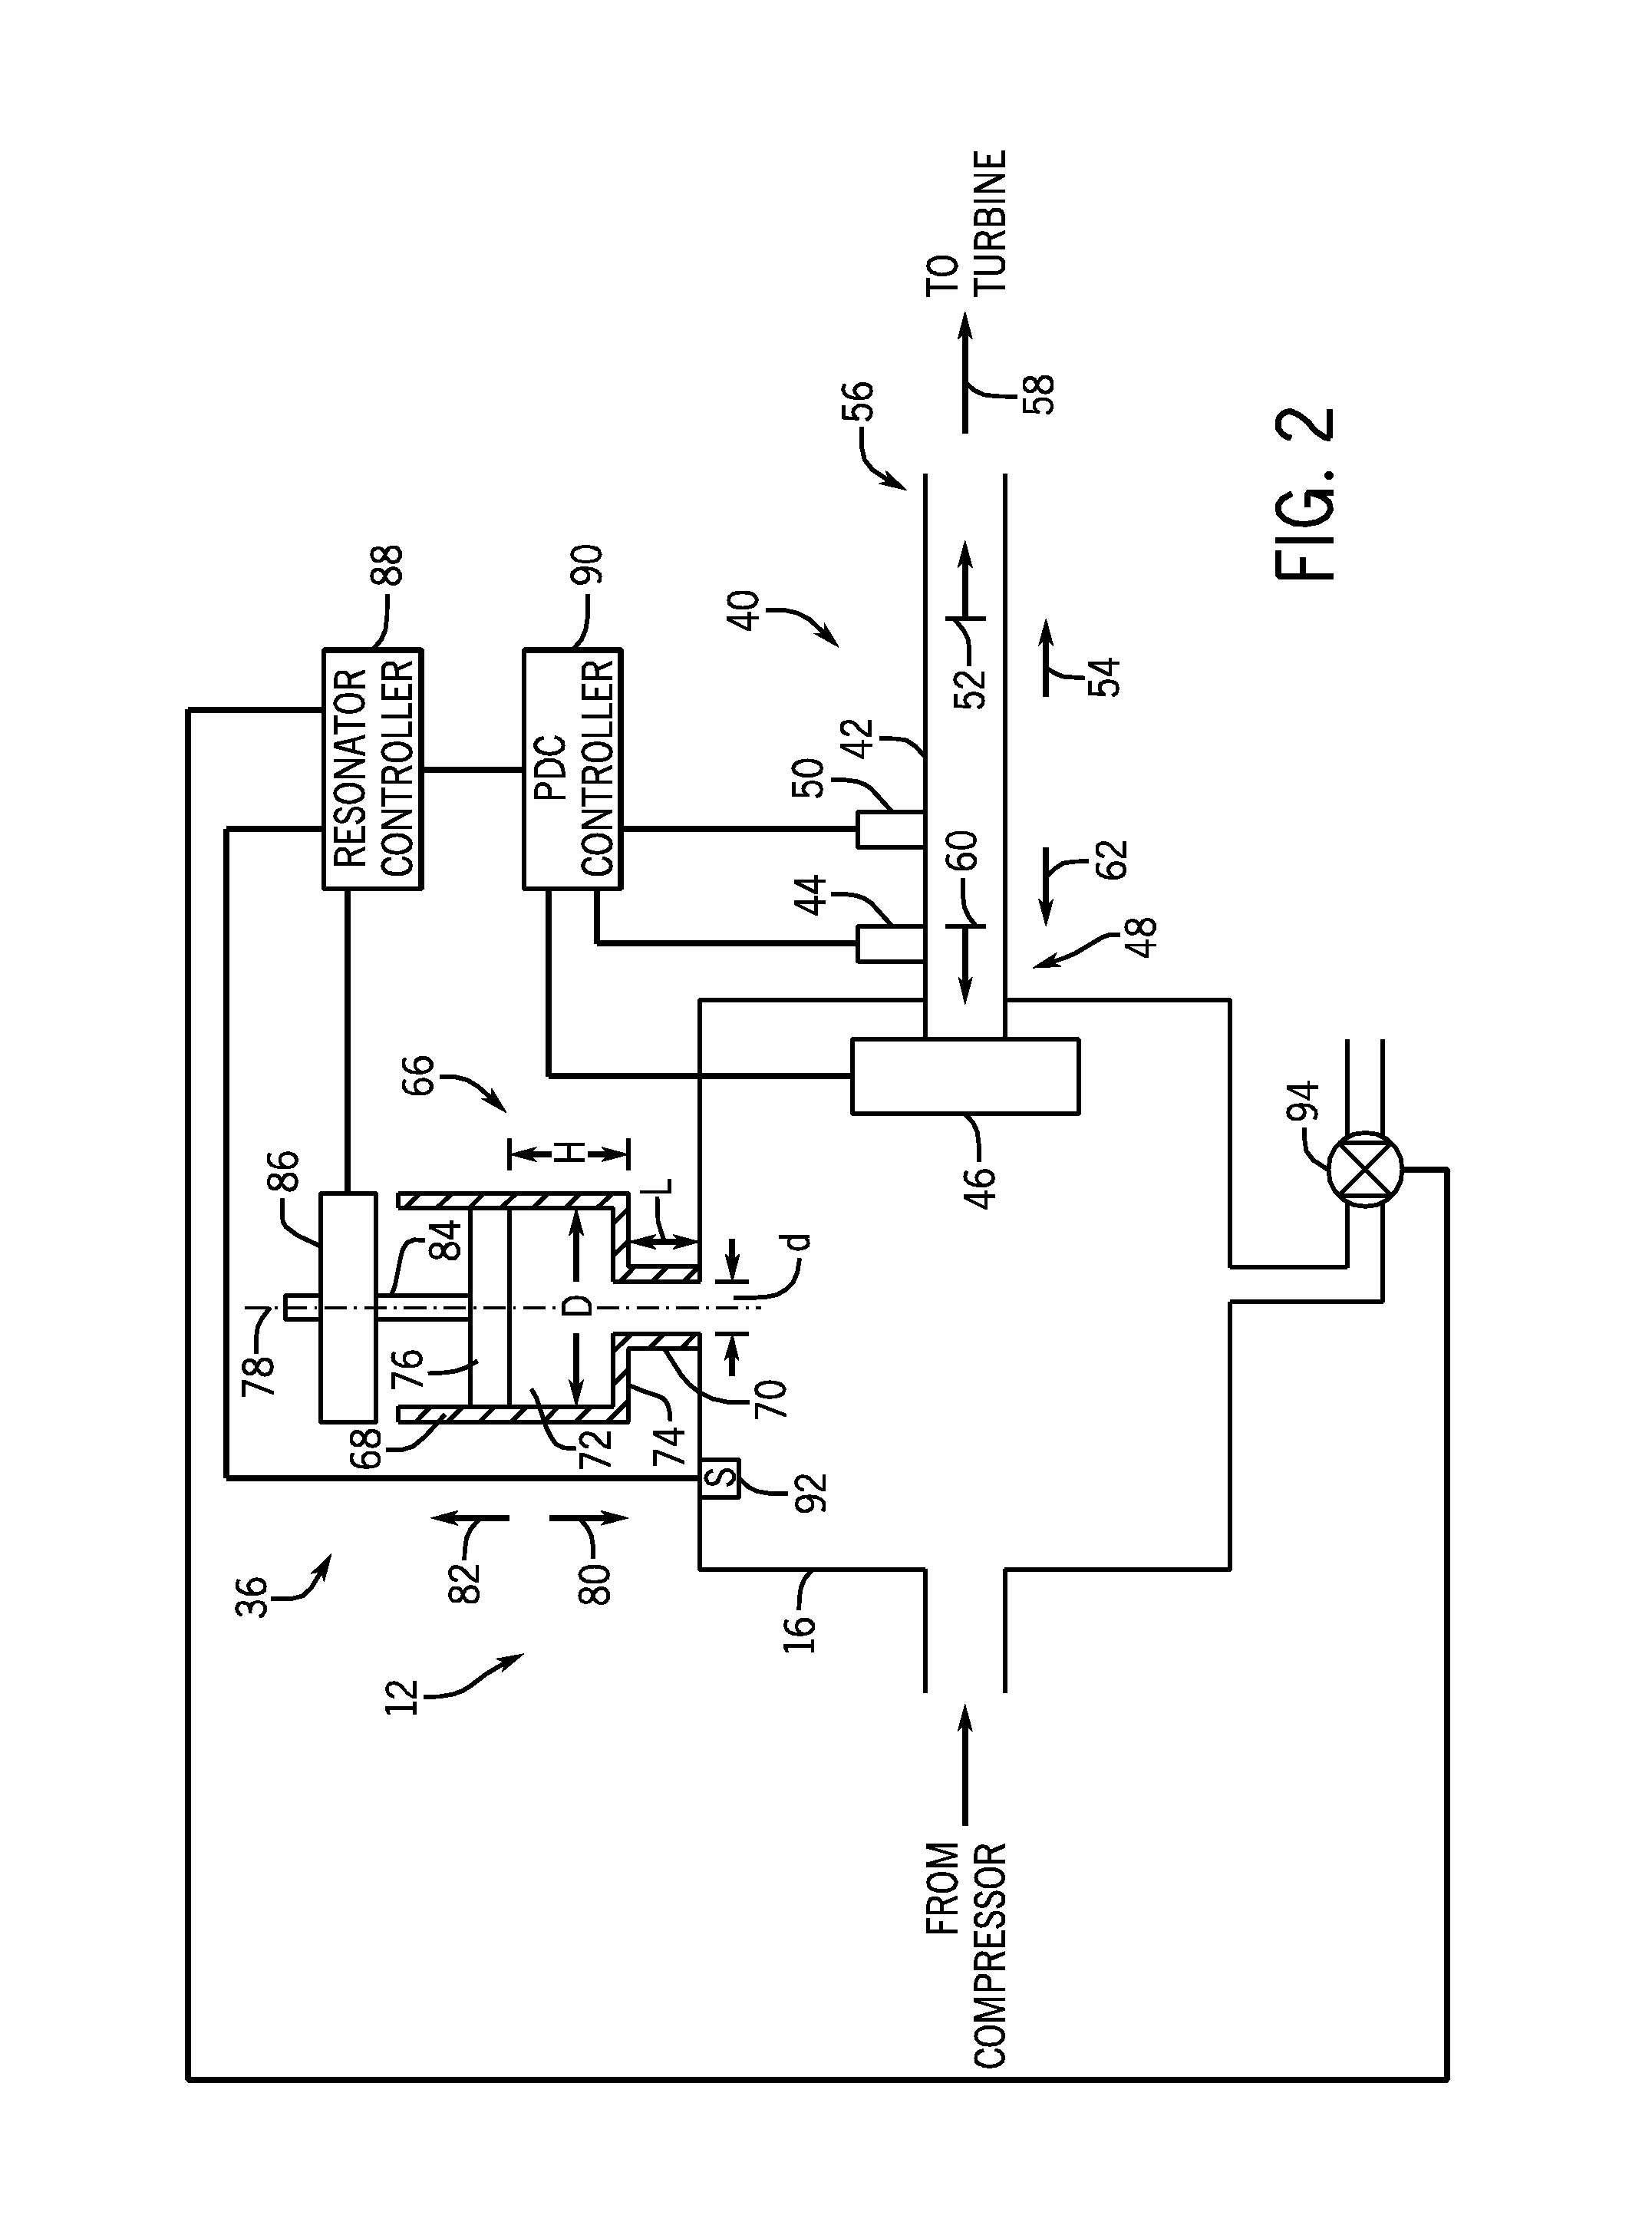 System and method for damping pressure oscillations within a pulse detonation engine